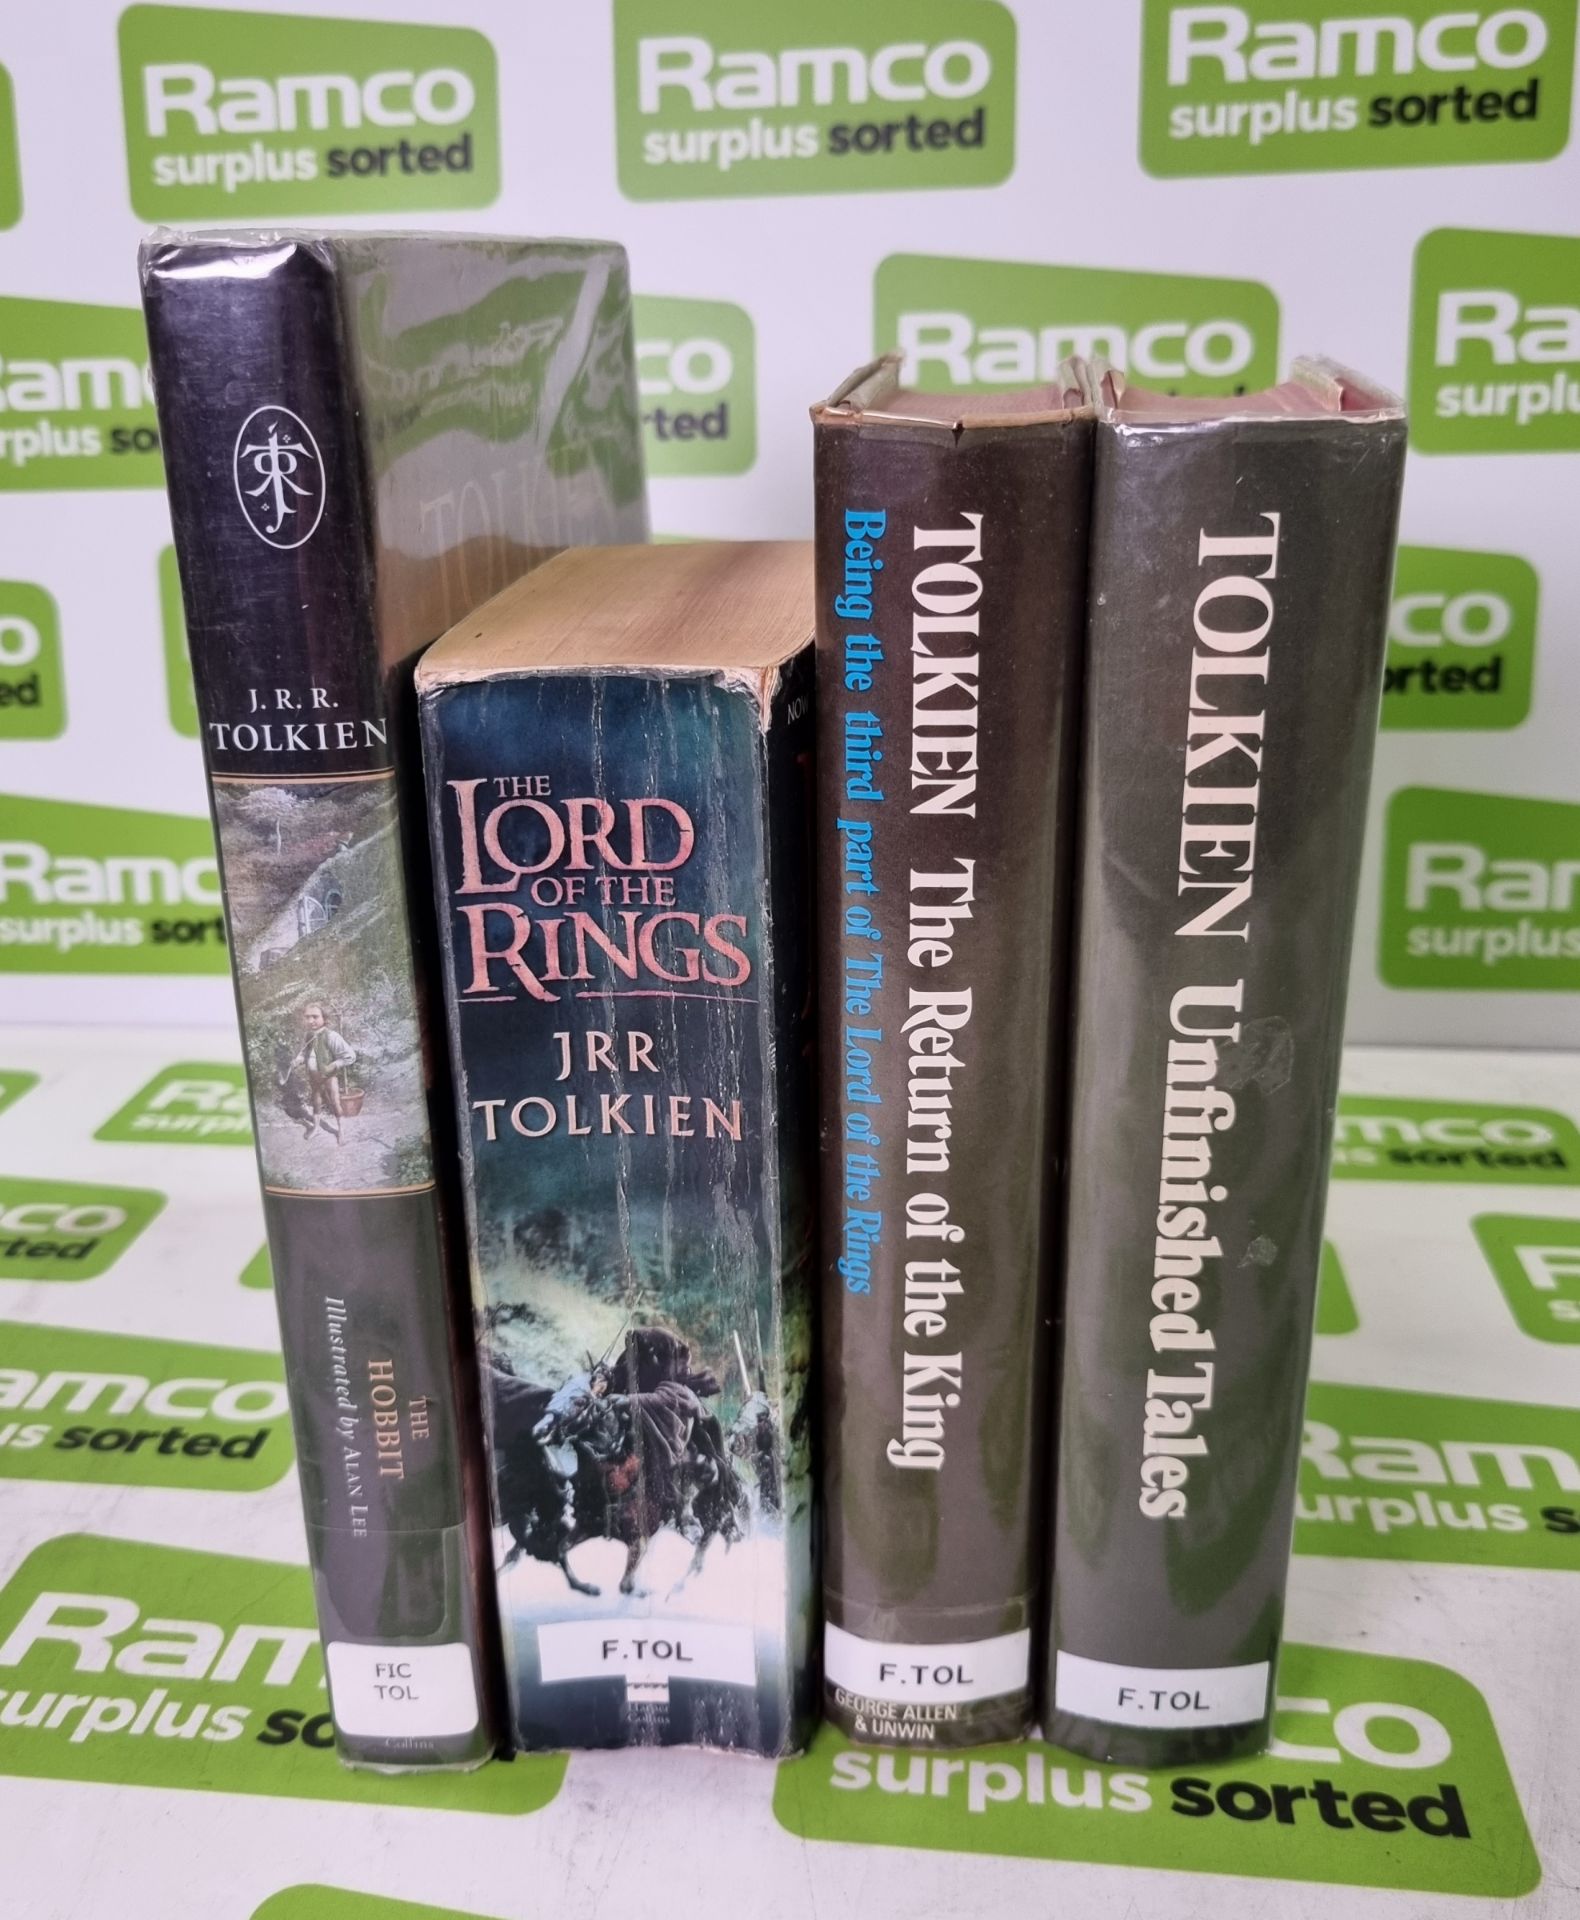 The Lord of the Rings by J.R.R Tolkien - London 2010, The Return of the King by J.R.R Tolkien